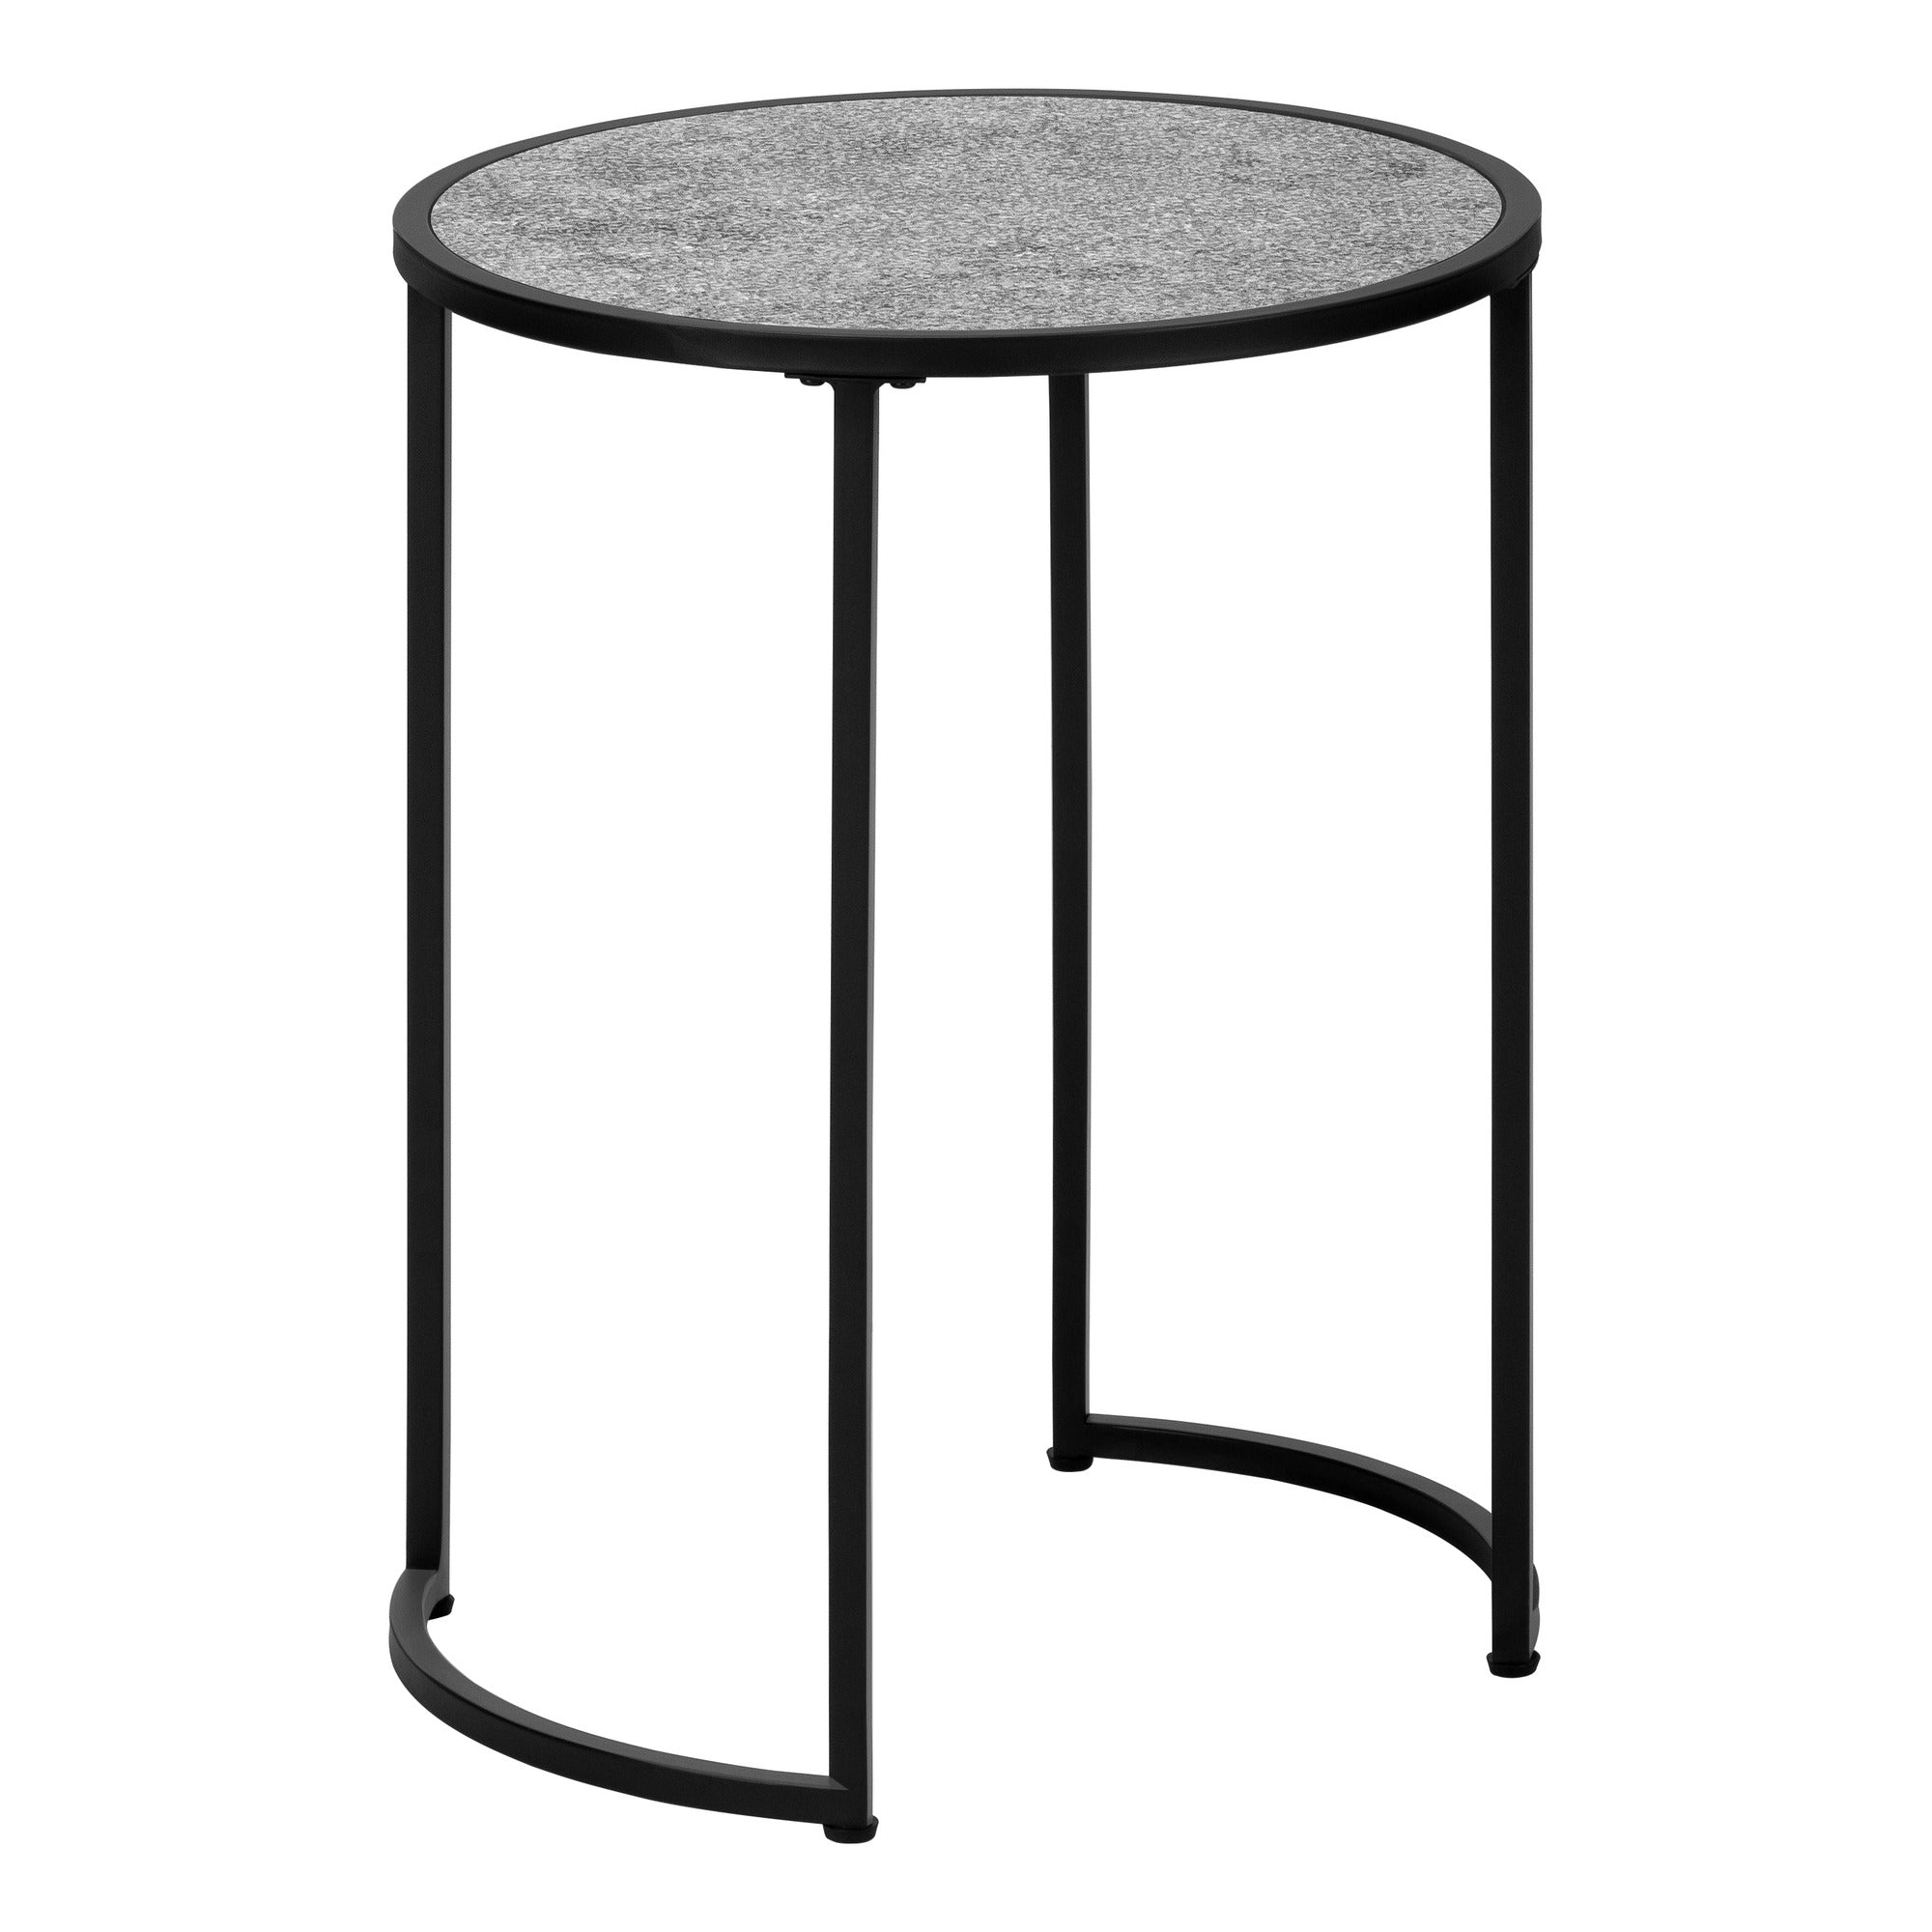 ACCENT TABLE - 24"H / WHITE MARBLE-LOOK / SILVER METAL